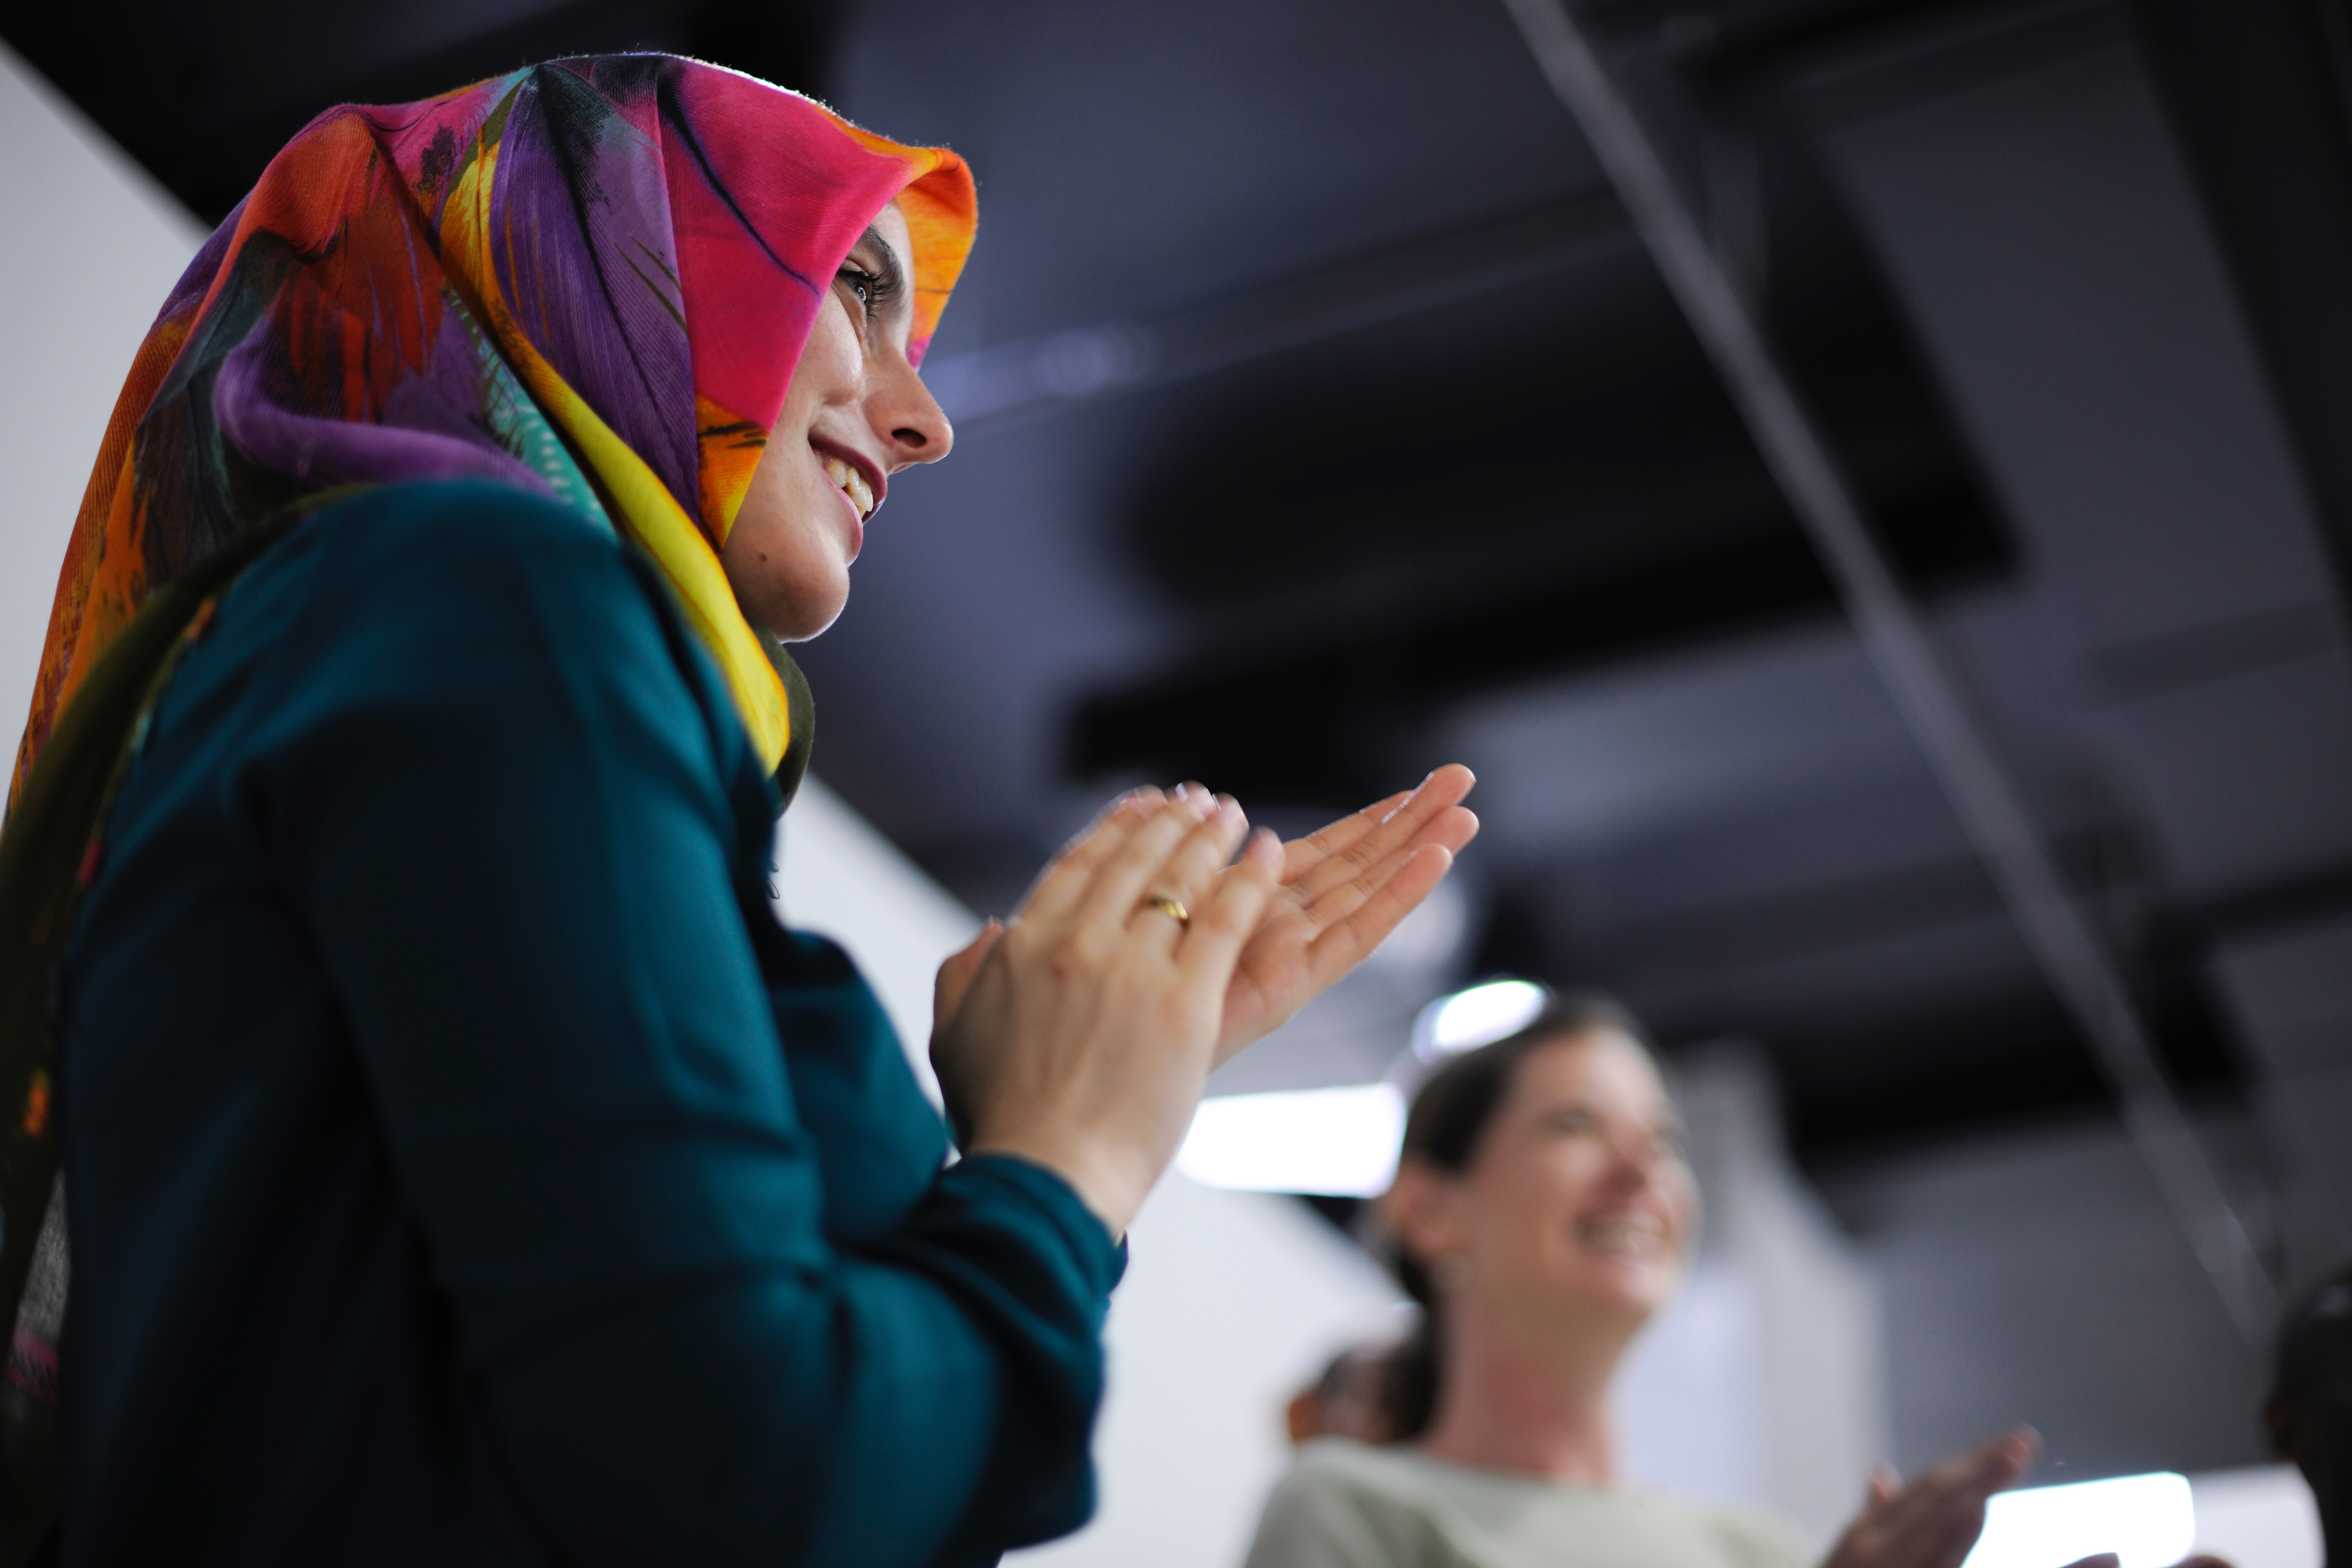 European Union Rules on Headscarves in the Workplace